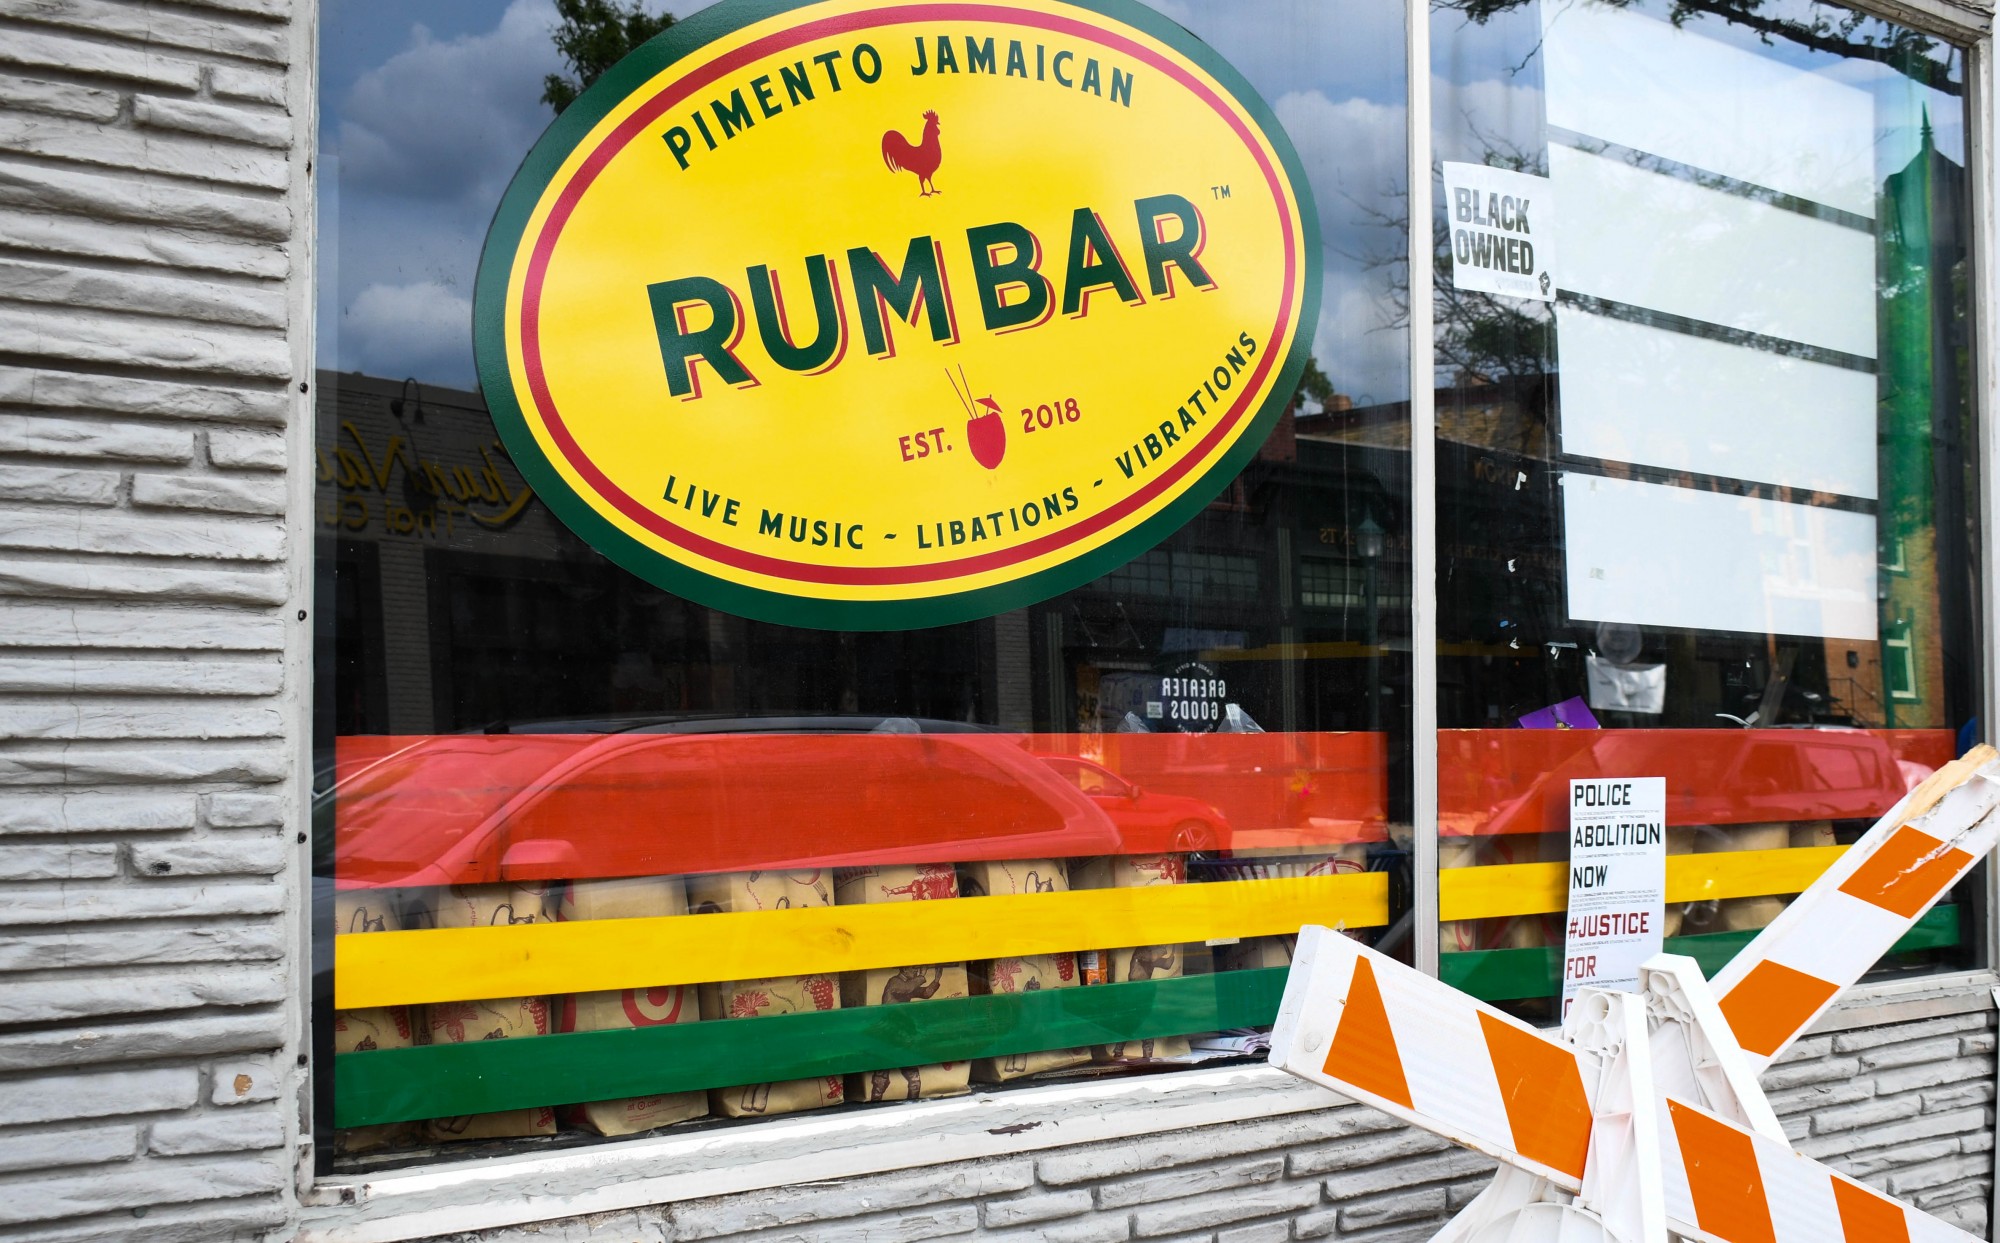 Pimento Jamaican Kitchen’s donation drop-off location on Sunday, June 28. Local Twin Cities eateries have opened their doors for donations to help communities heal.